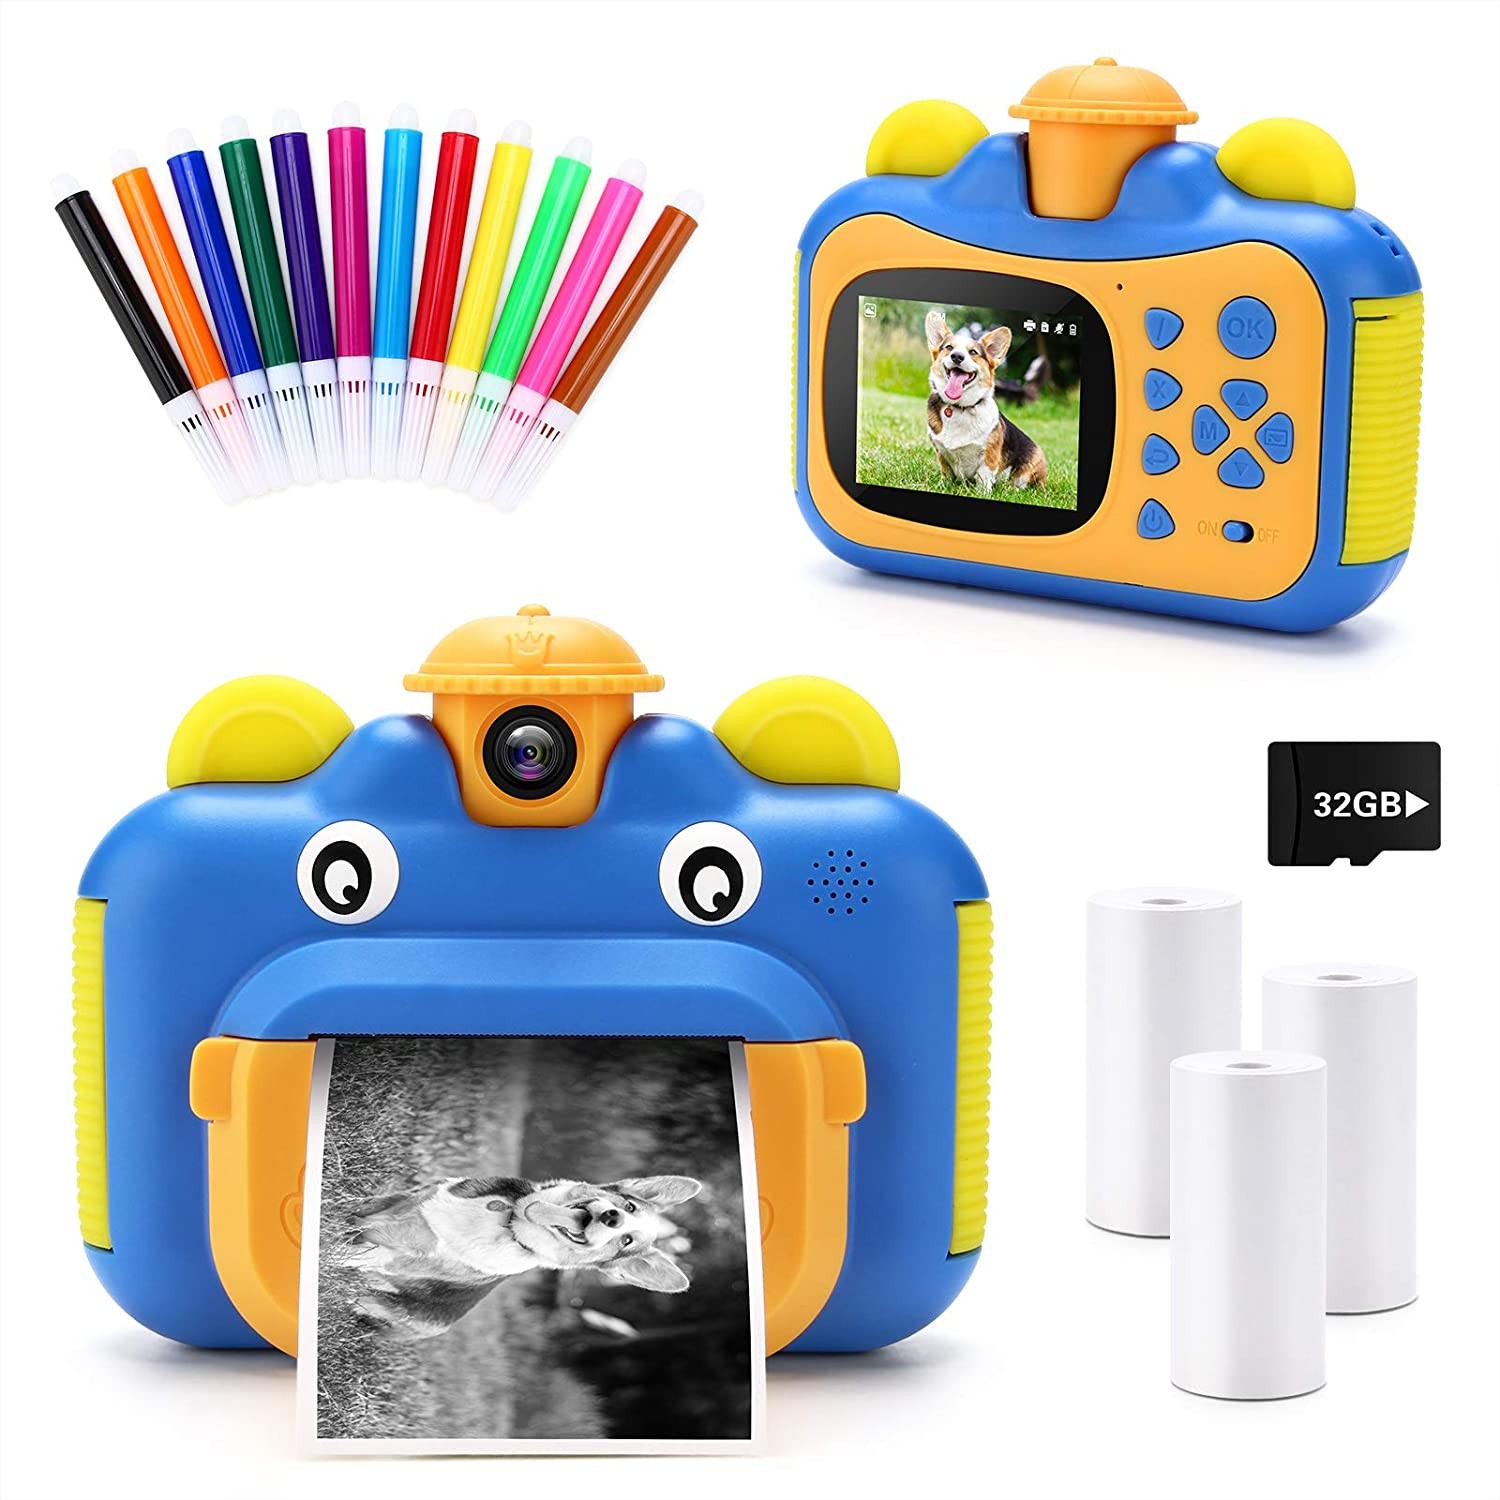 INKPOT instant camera with accessories.